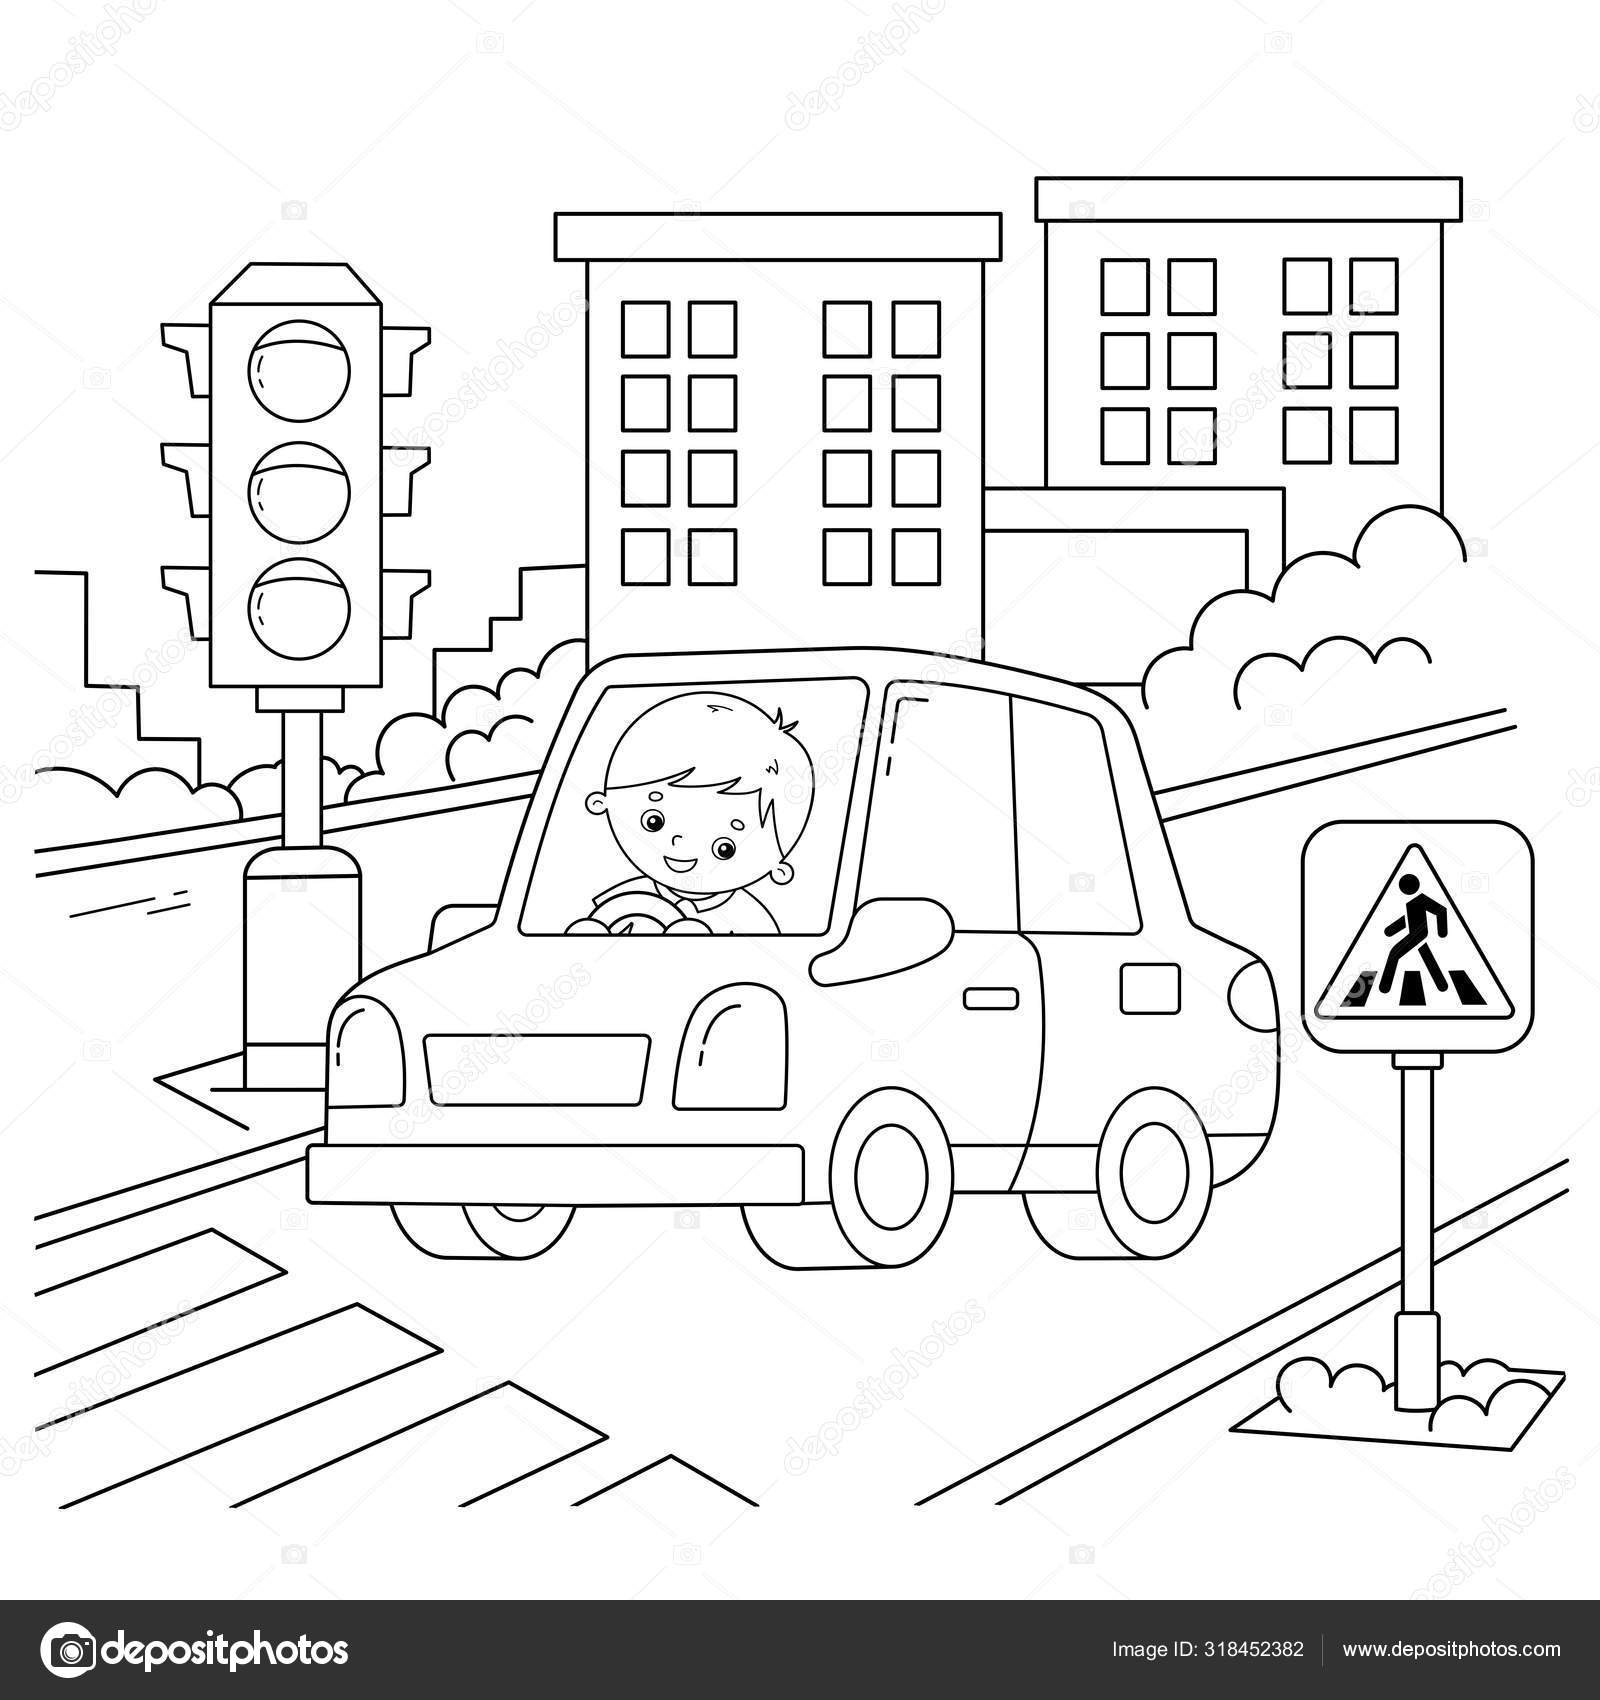 Coloring page outline of cartoon car with driver on road traffic light image transport or vehicle for children coloring book for kids stock vector by oleon